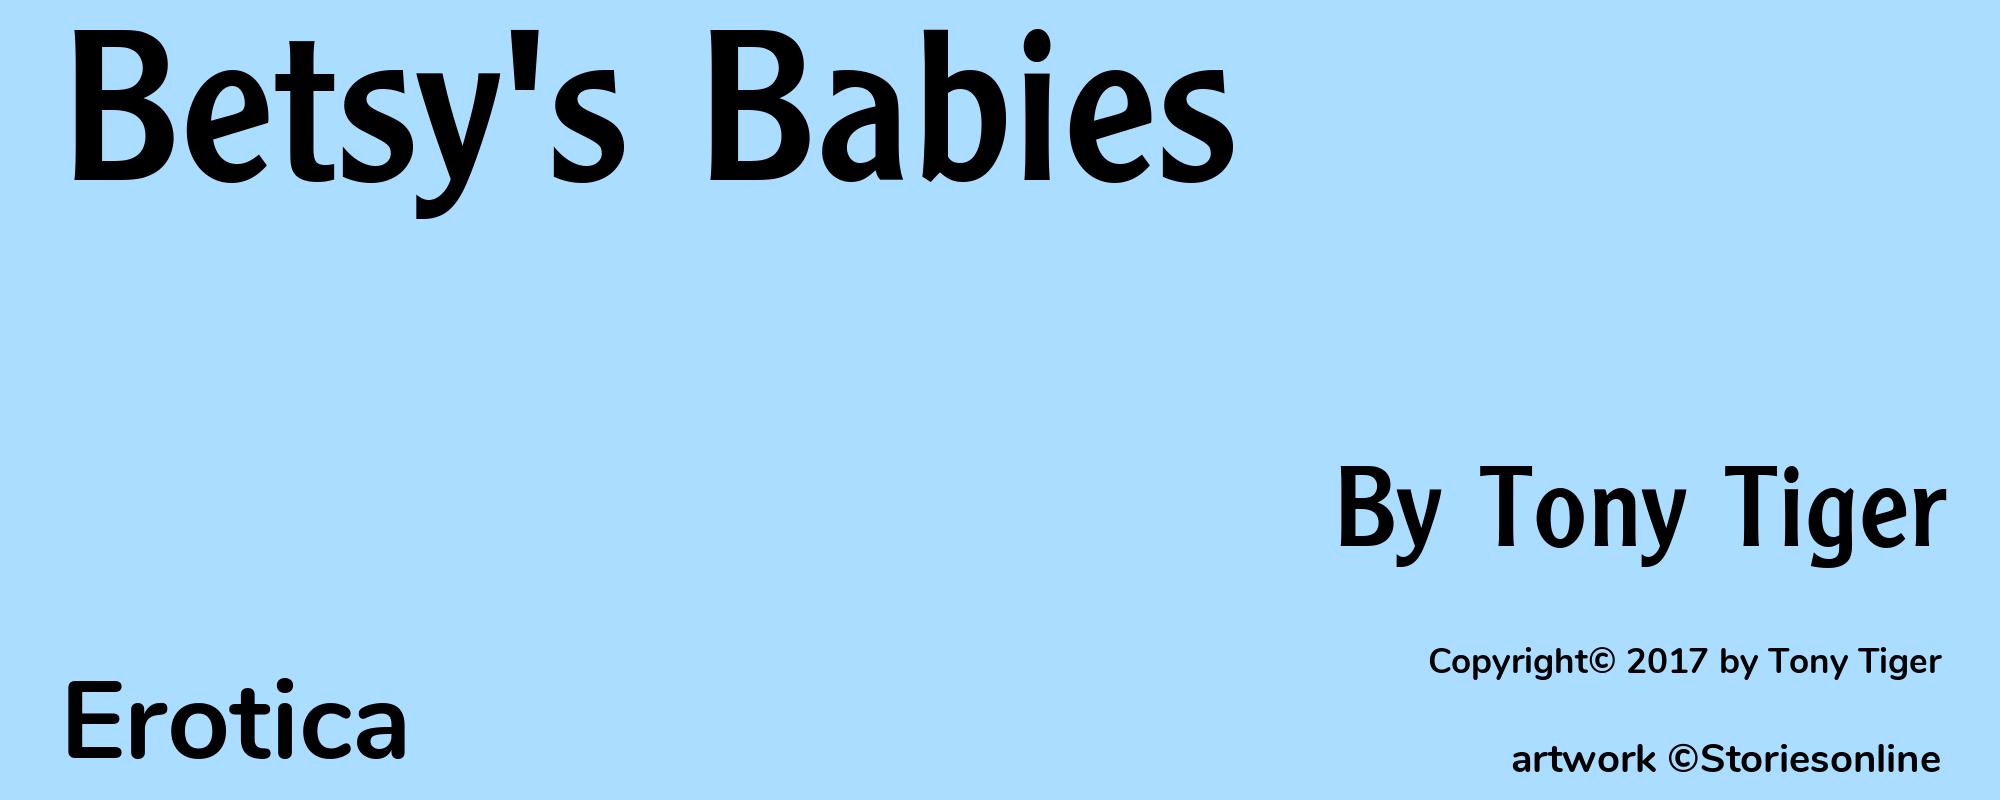 Betsy's Babies - Cover